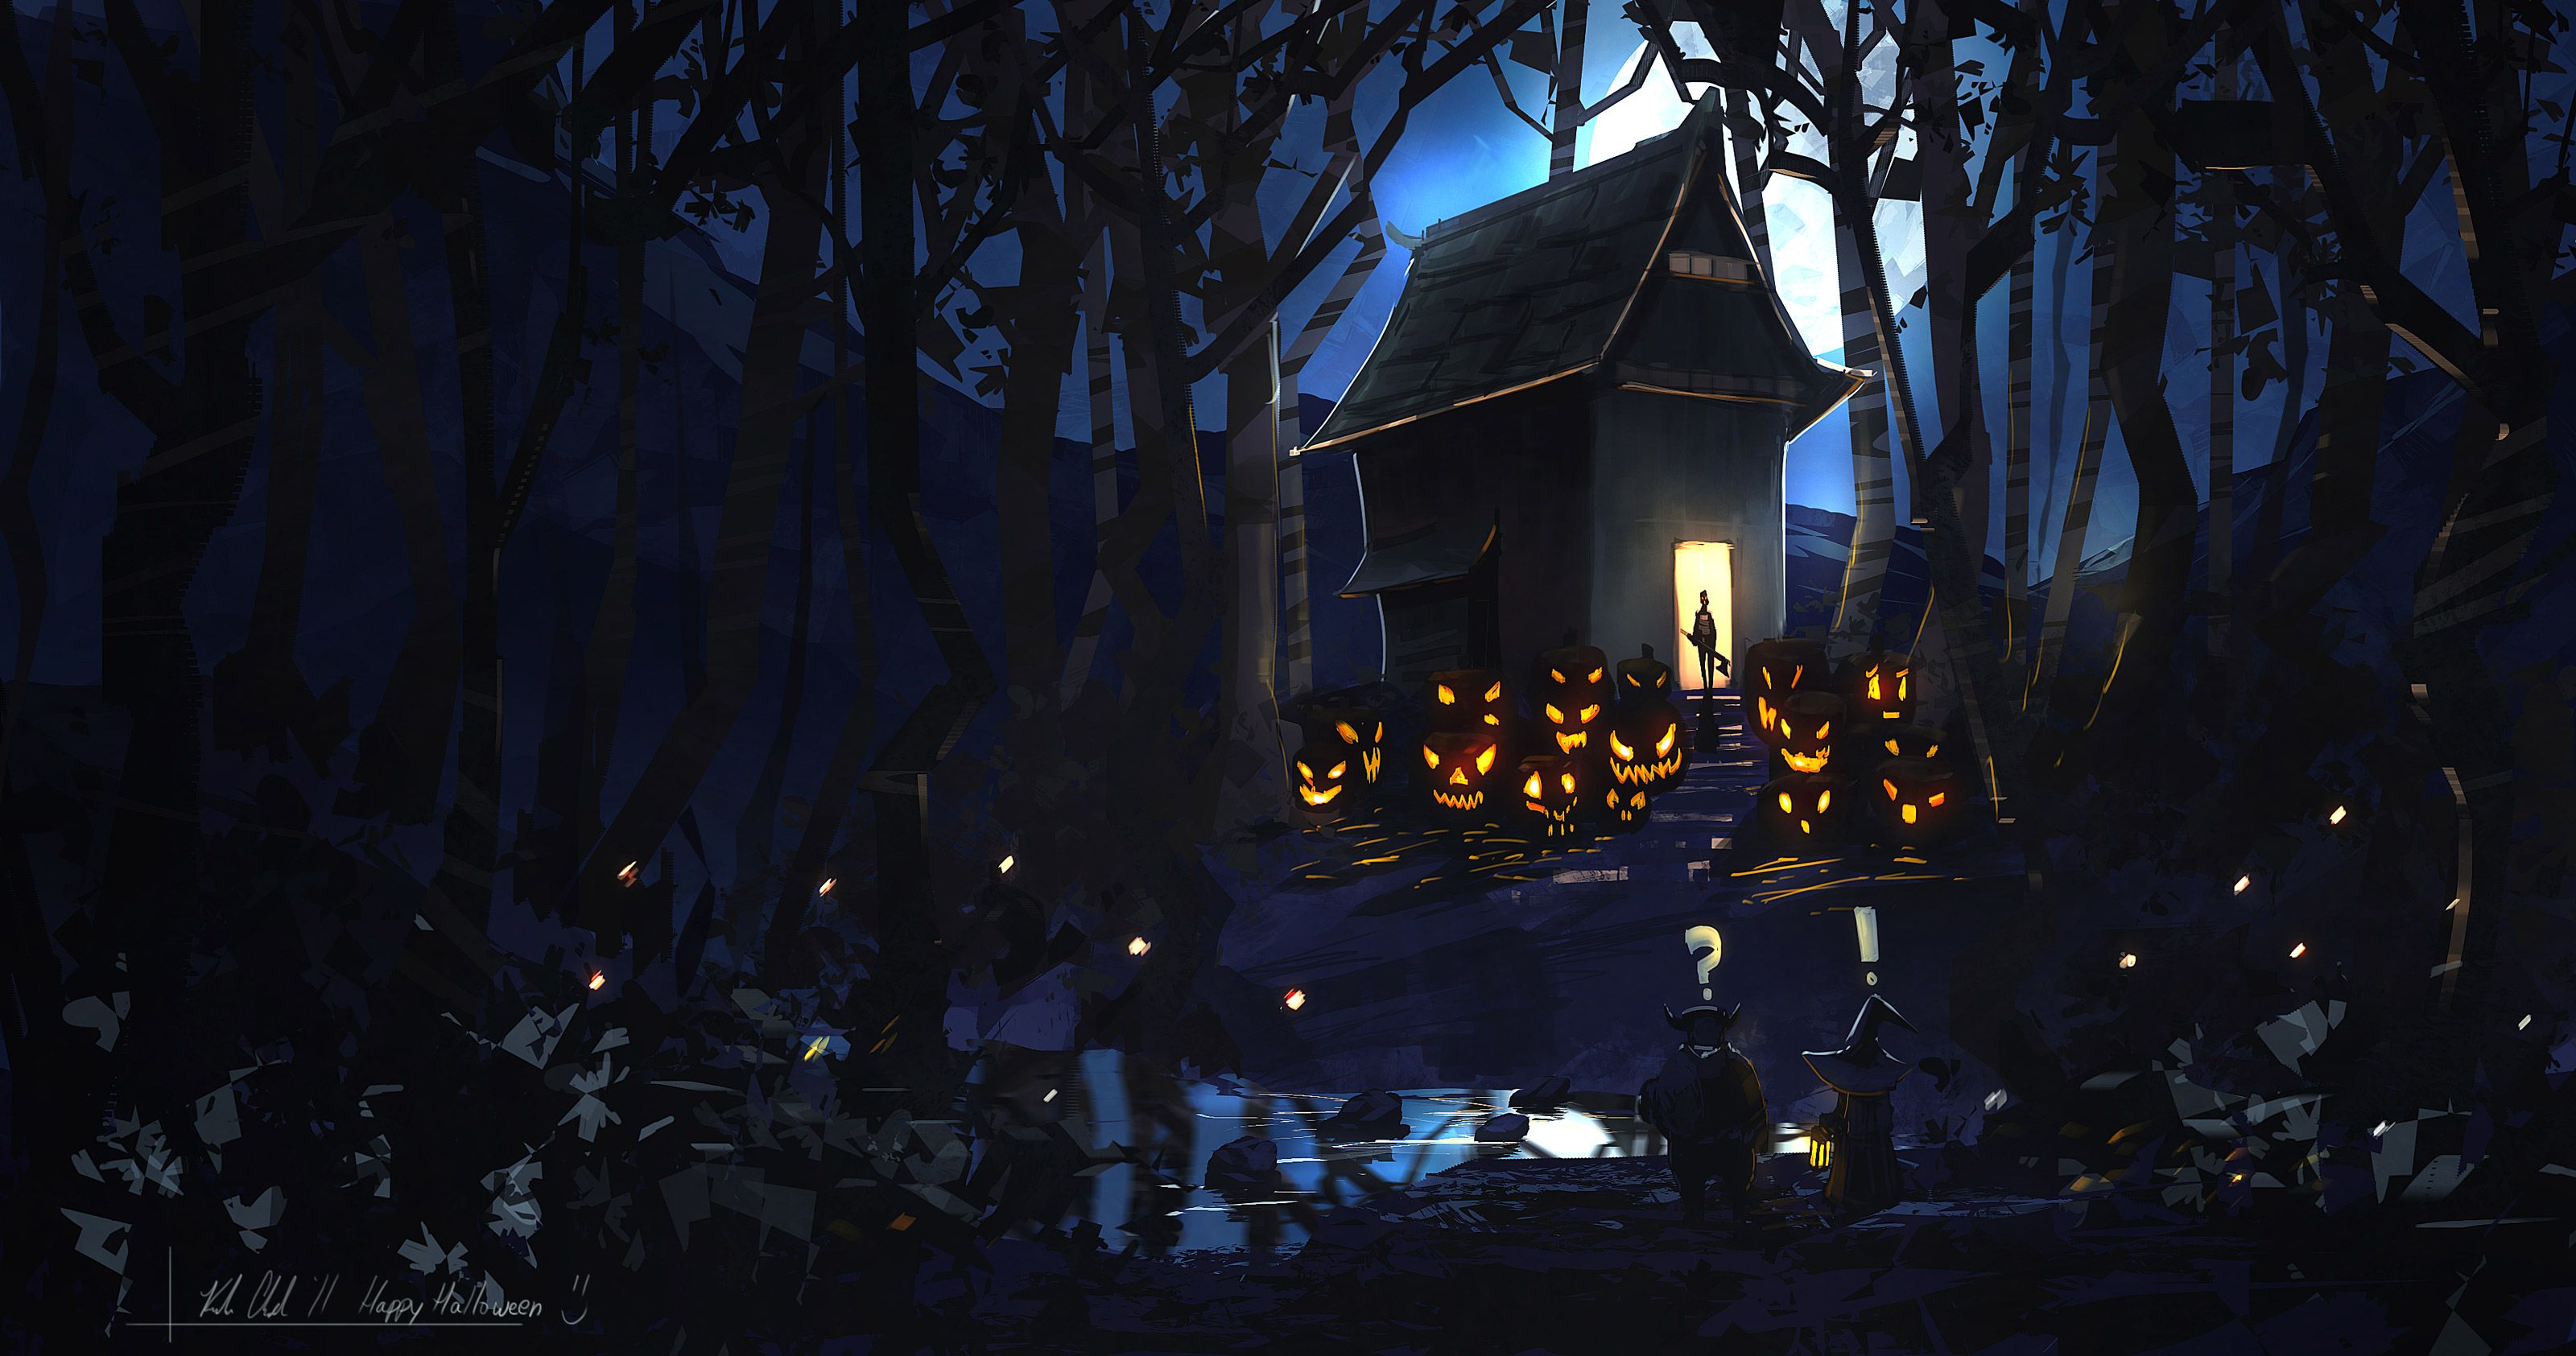 Spooky Background Full Screen. Spooky Moon Wallpaper, Spooky Witch Wallpaper and Spooky October Wallpaper